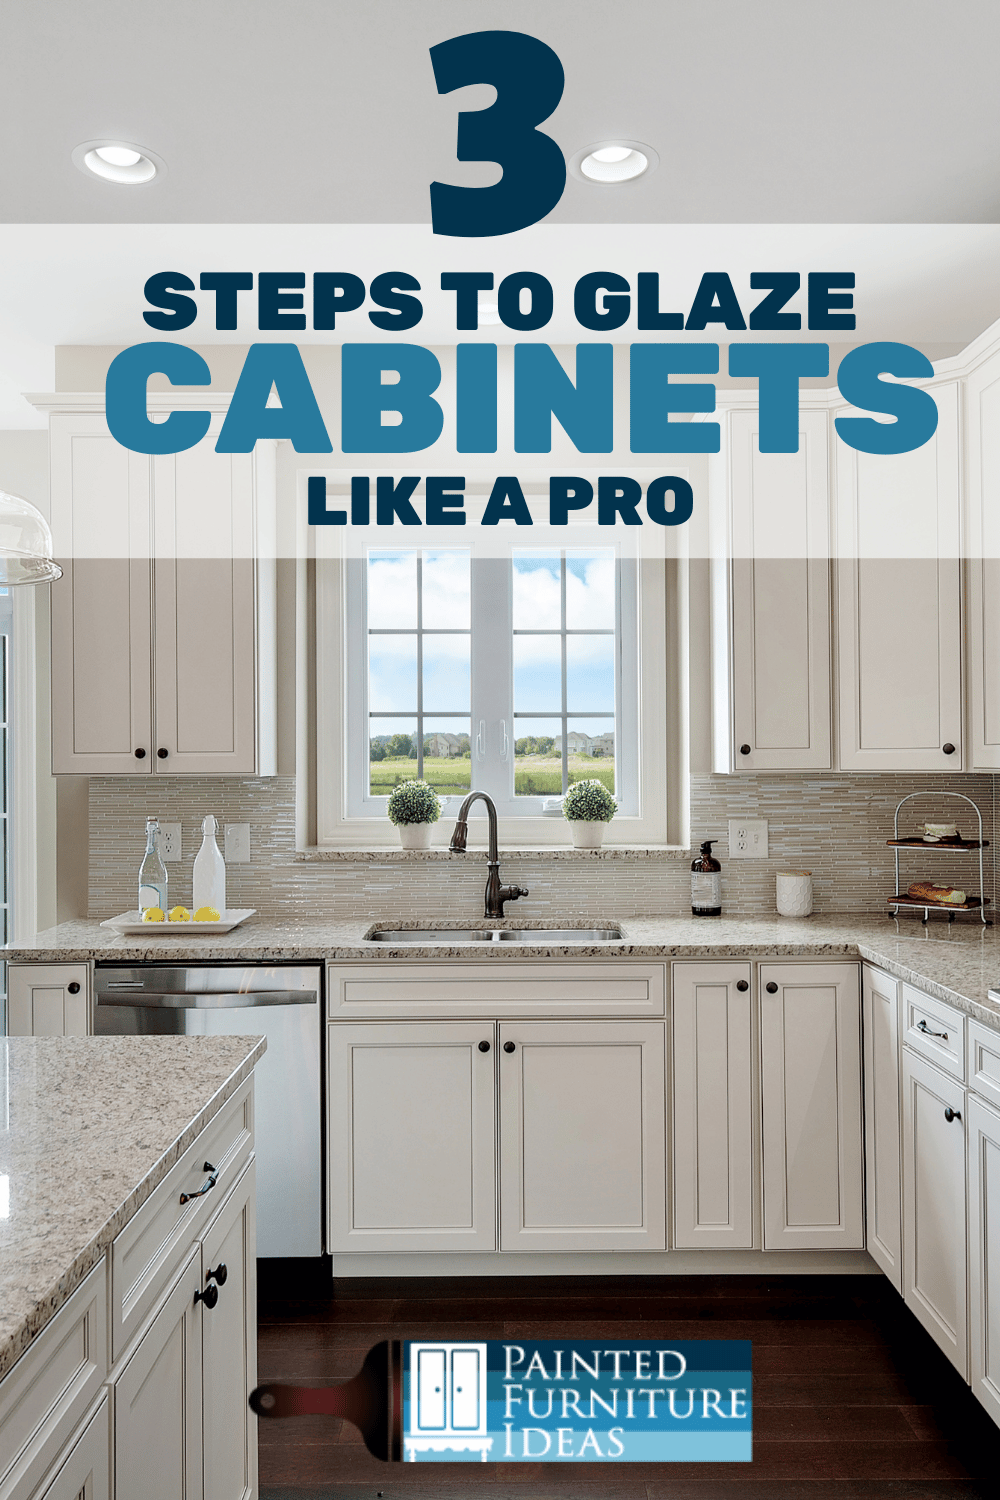 Glazing wood cabinets can change the entire feel of your room, learn before you start this DIY home project!